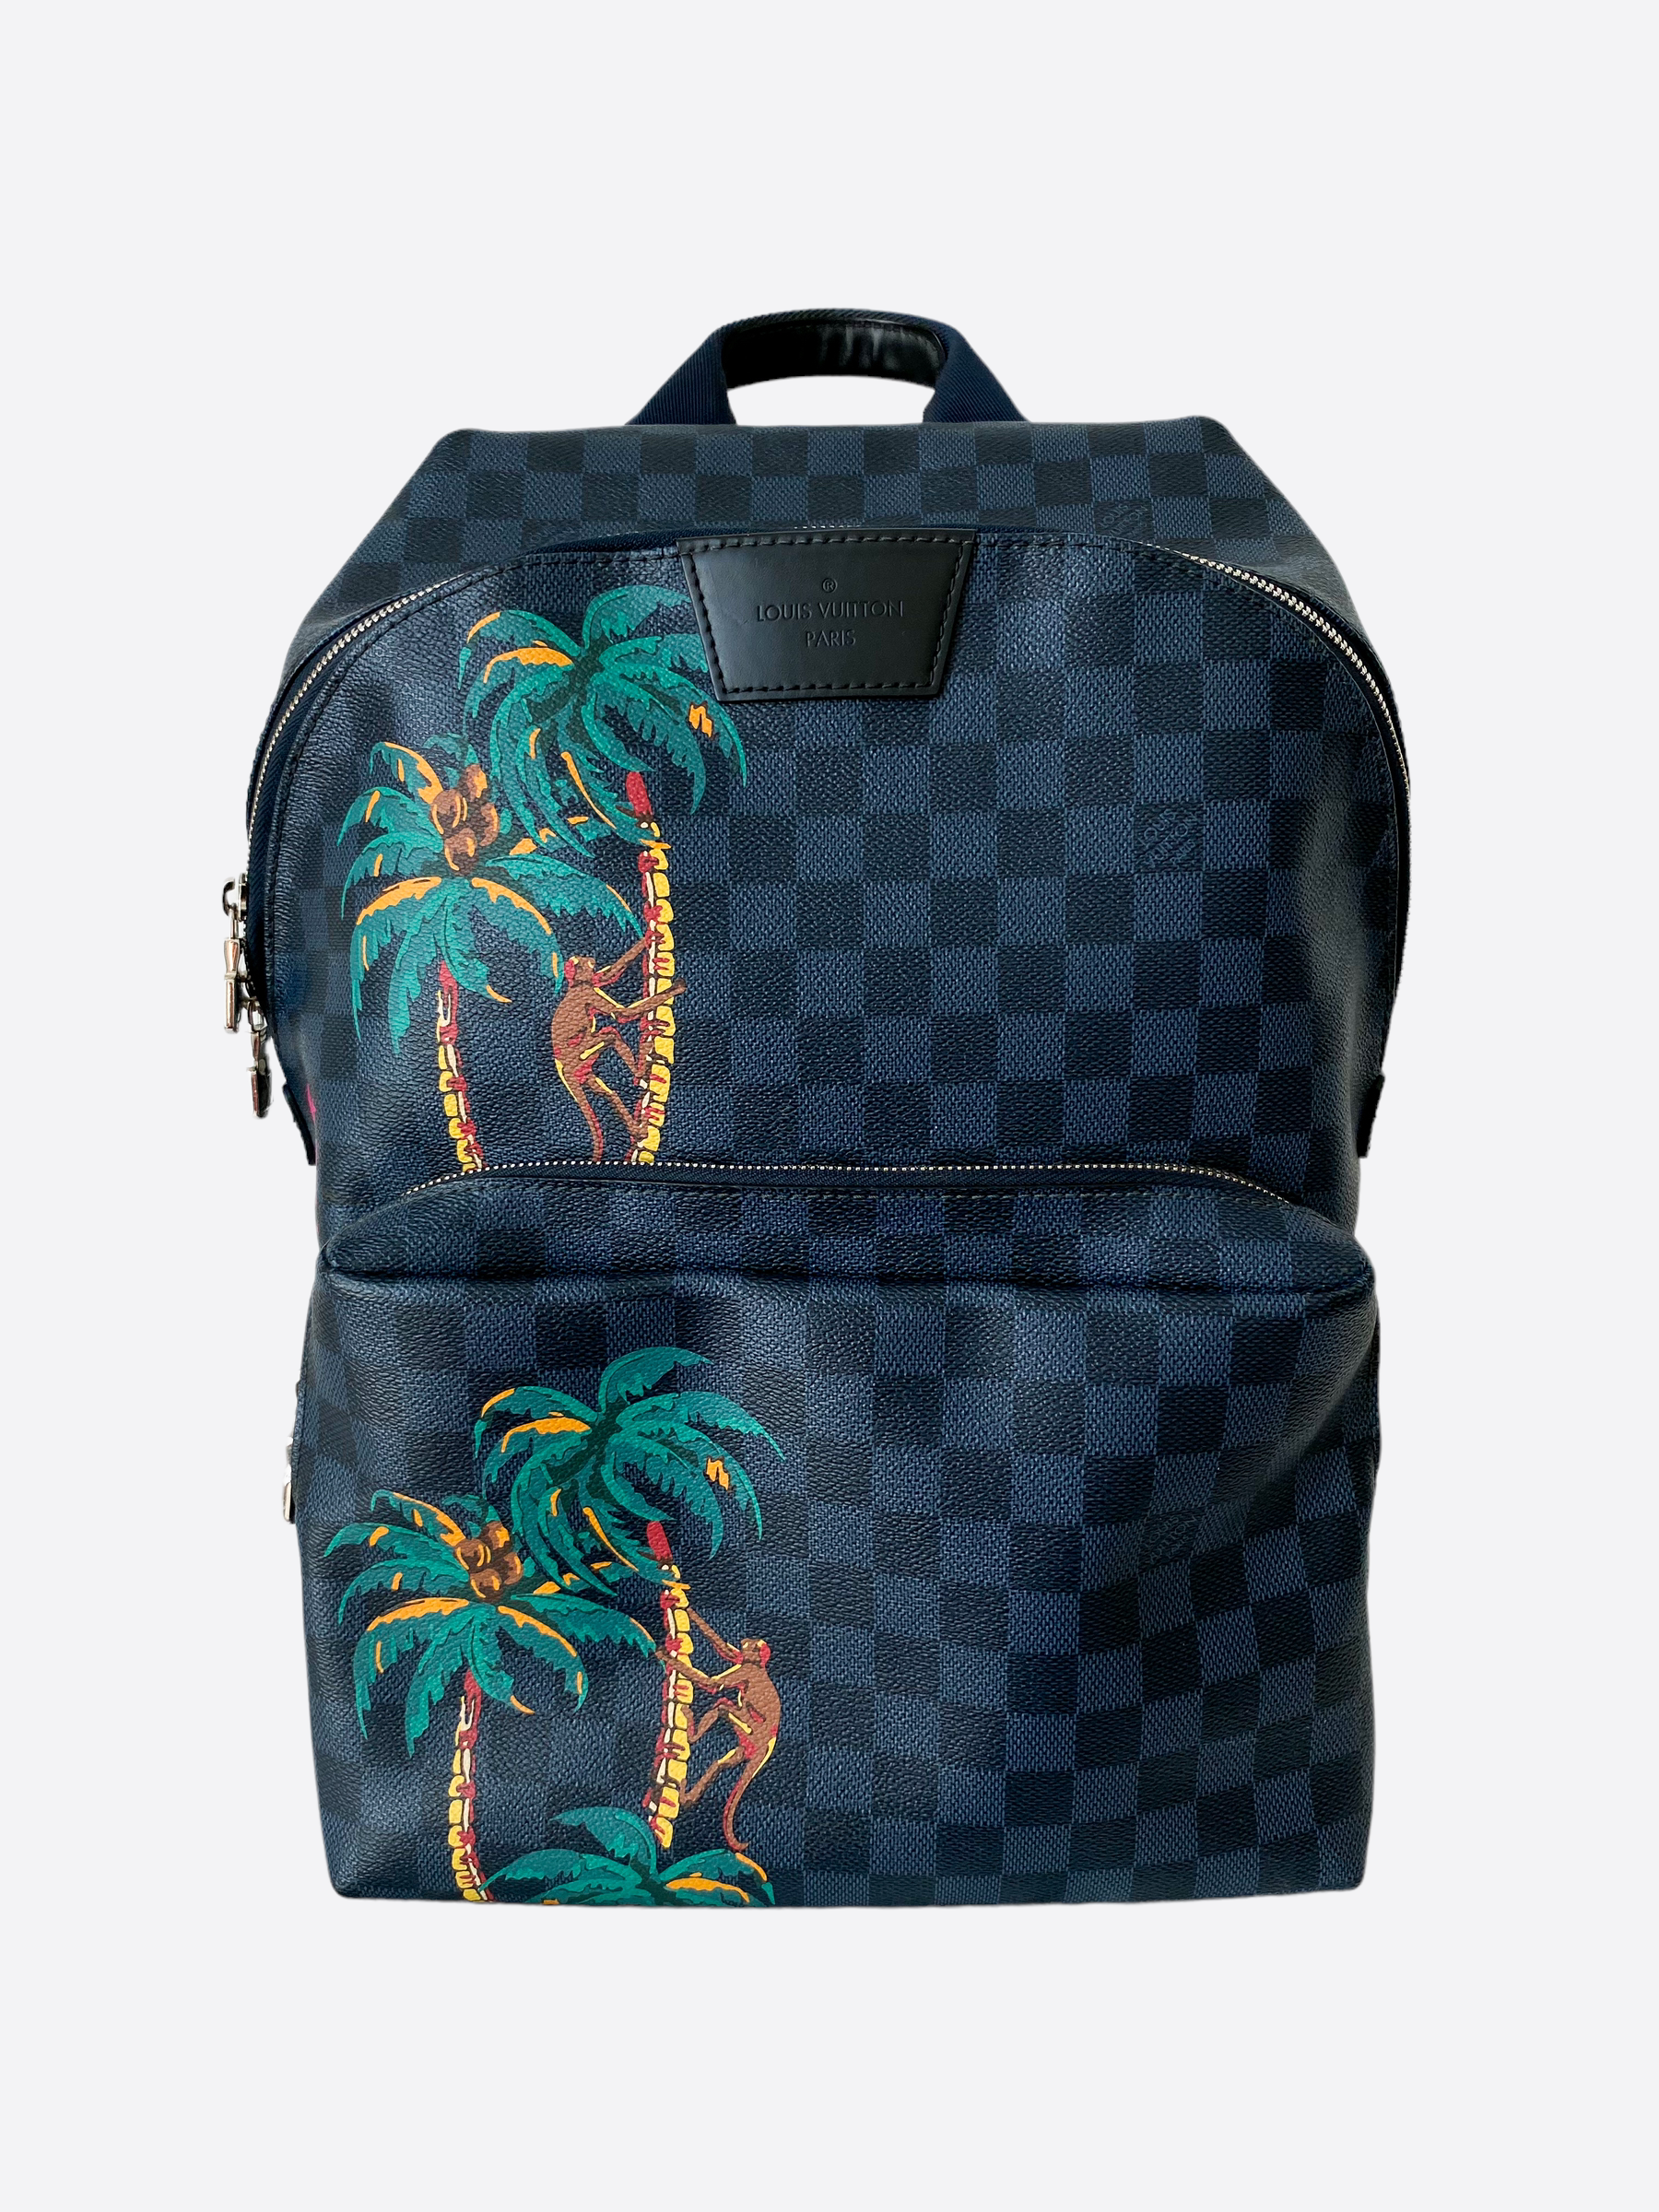 vuitton backpack palm